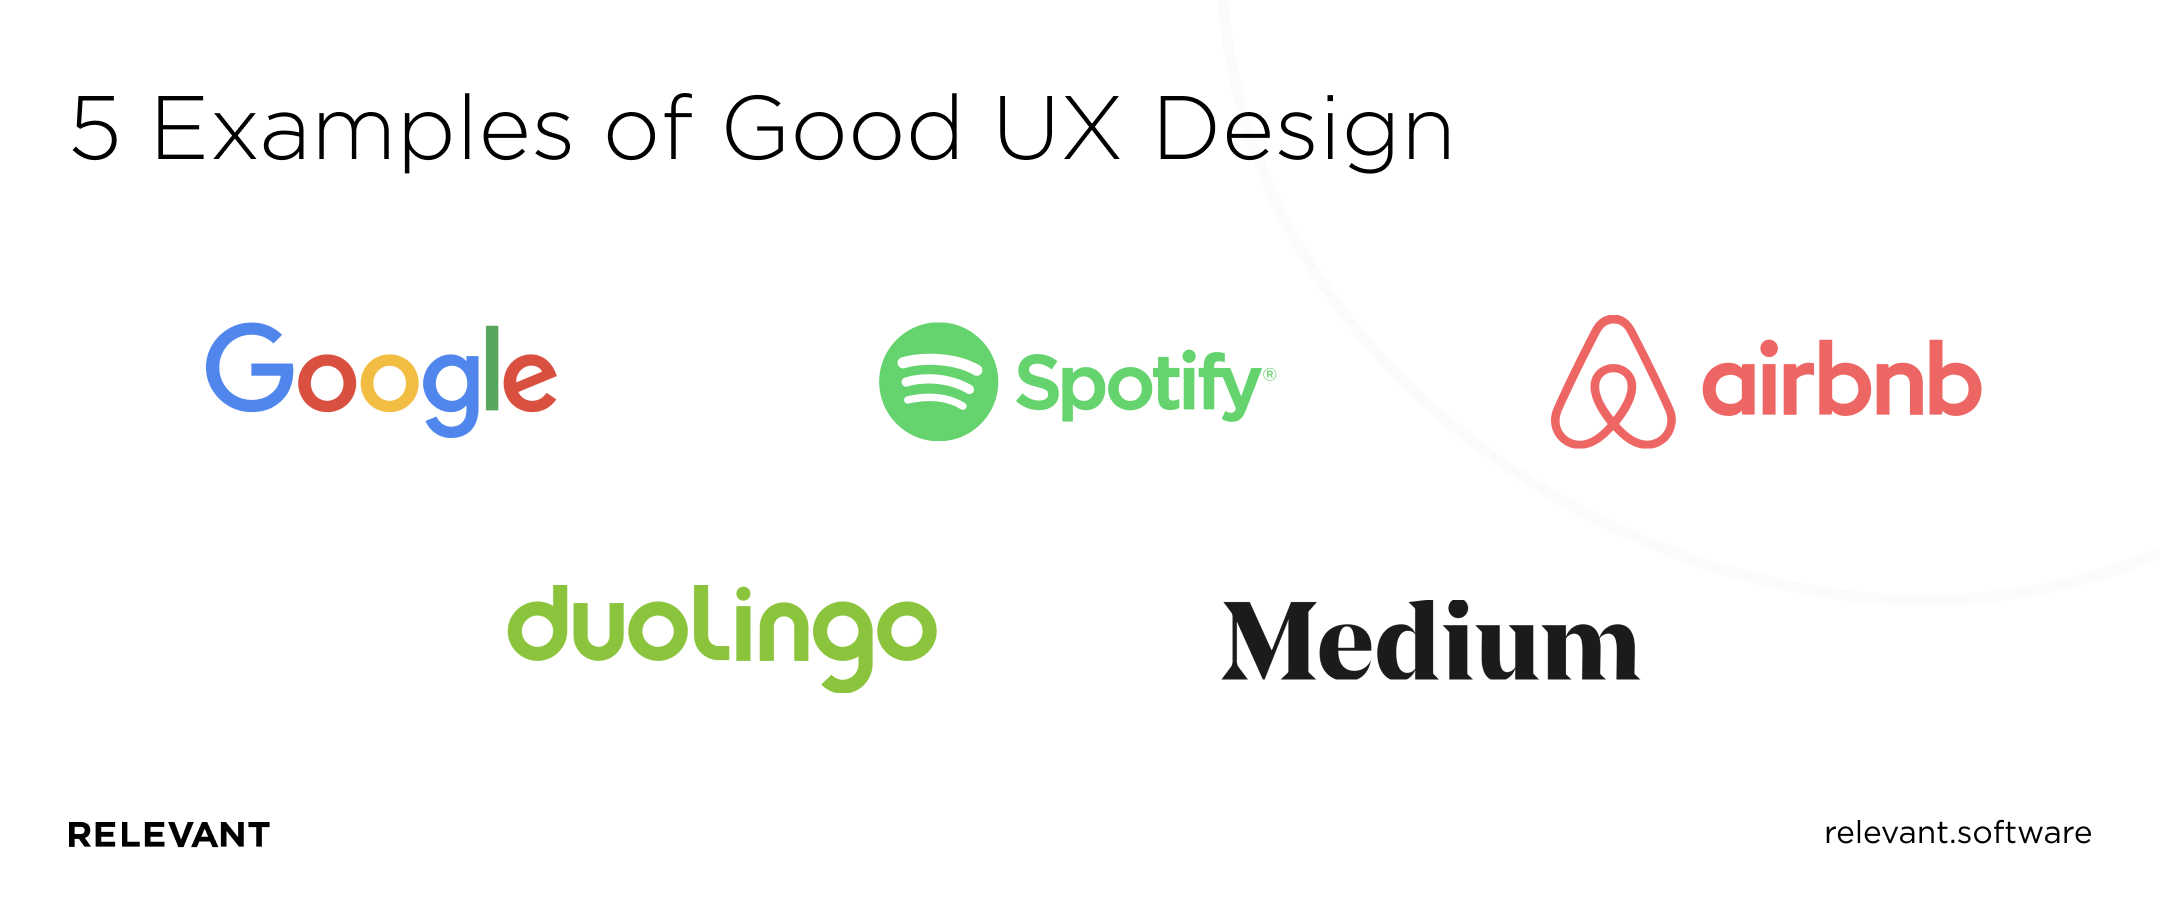 5 Examples of Good UX Design